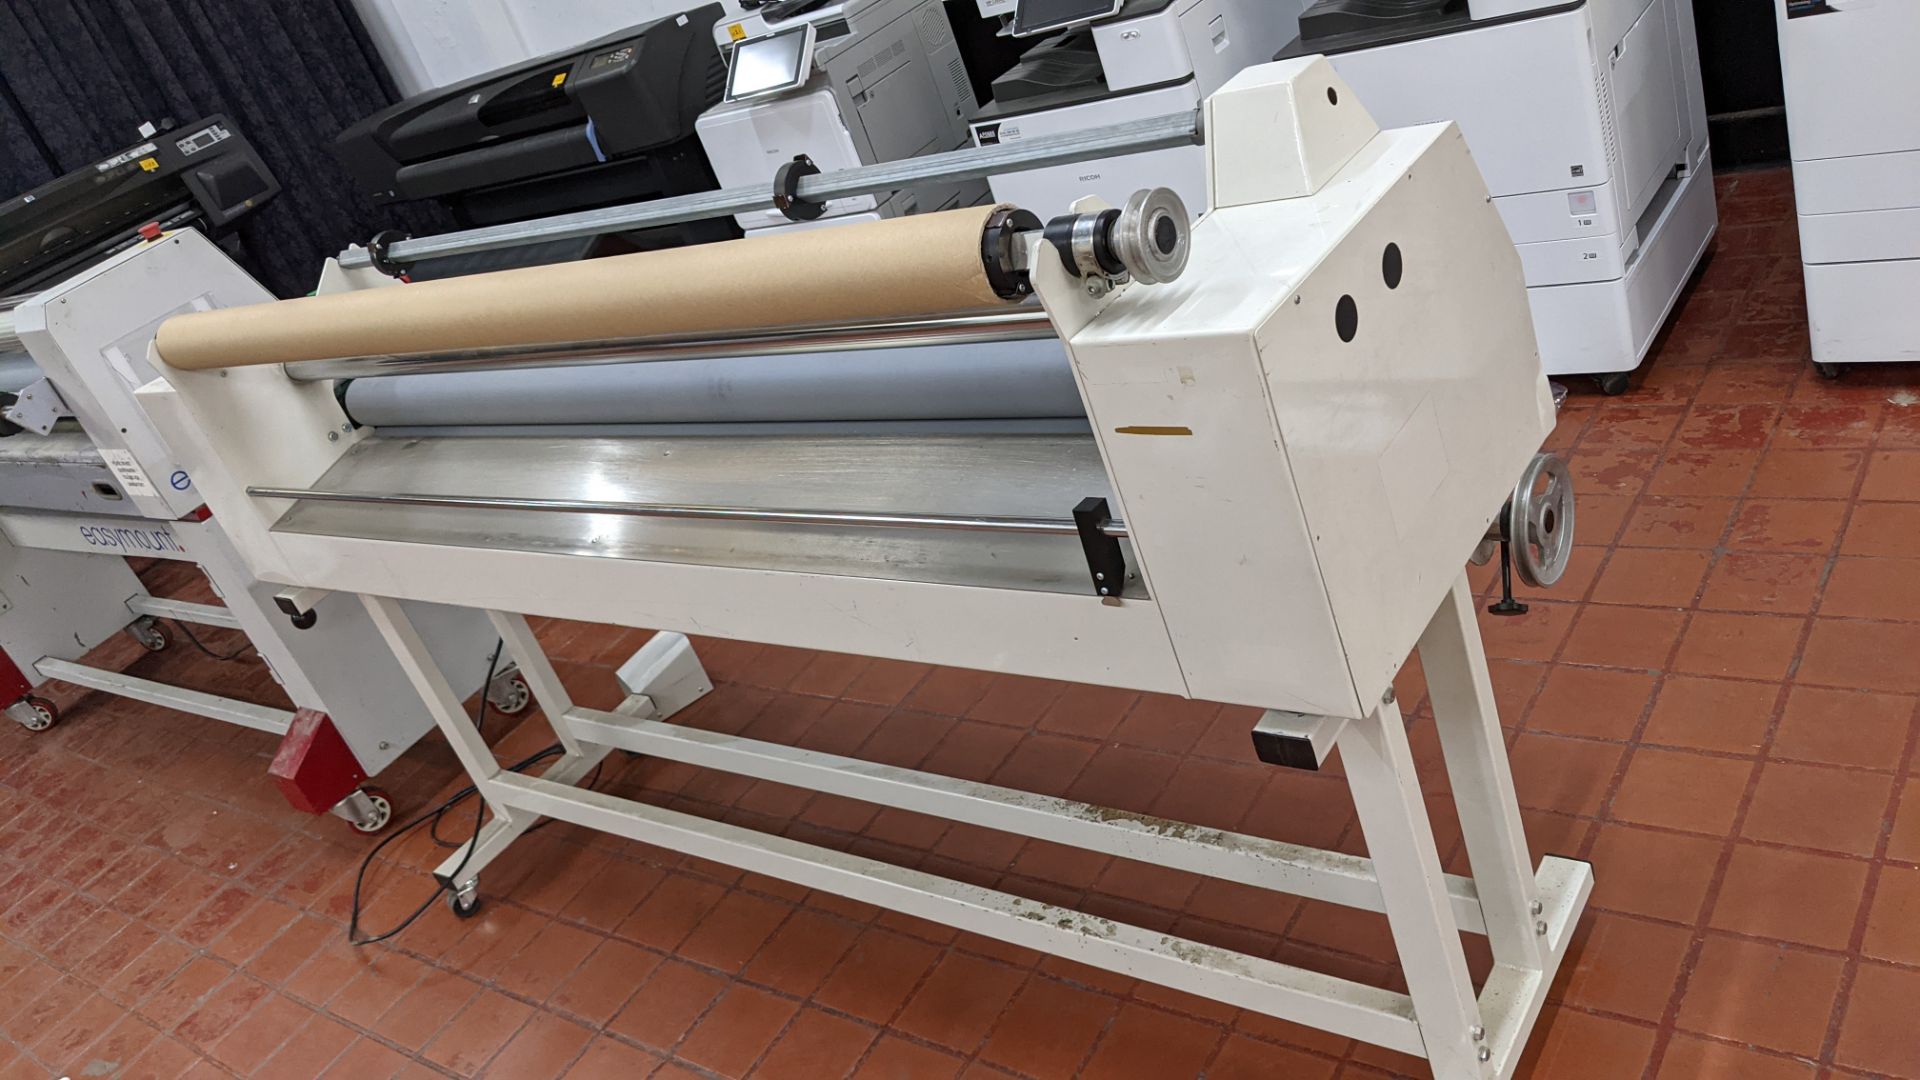 xativa Makrolam 2R 1650 thermal laminator with foot control - Image 9 of 12